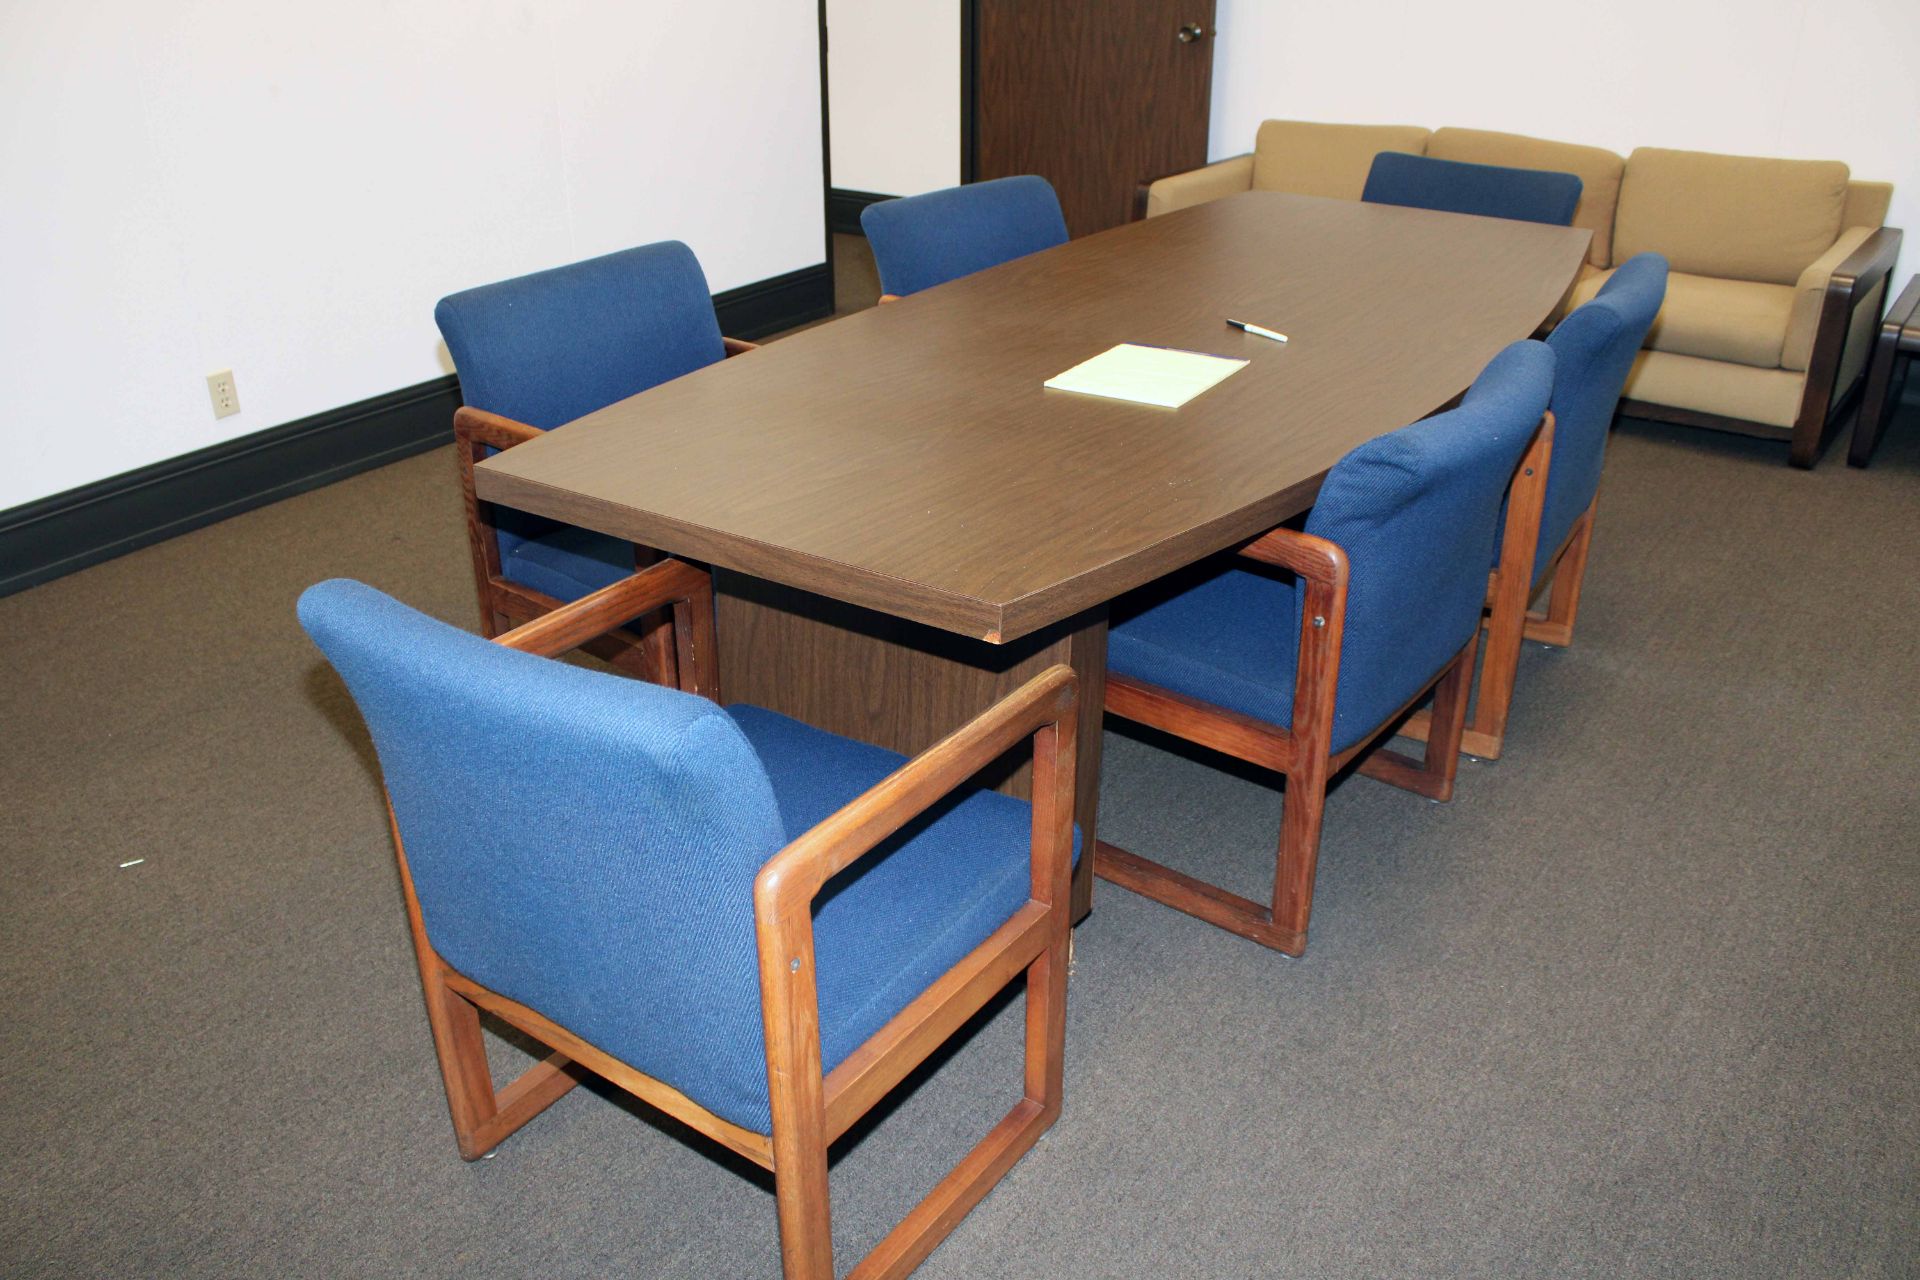 LOT CONSISTING OF: conference table, chairs & couch - Image 3 of 3